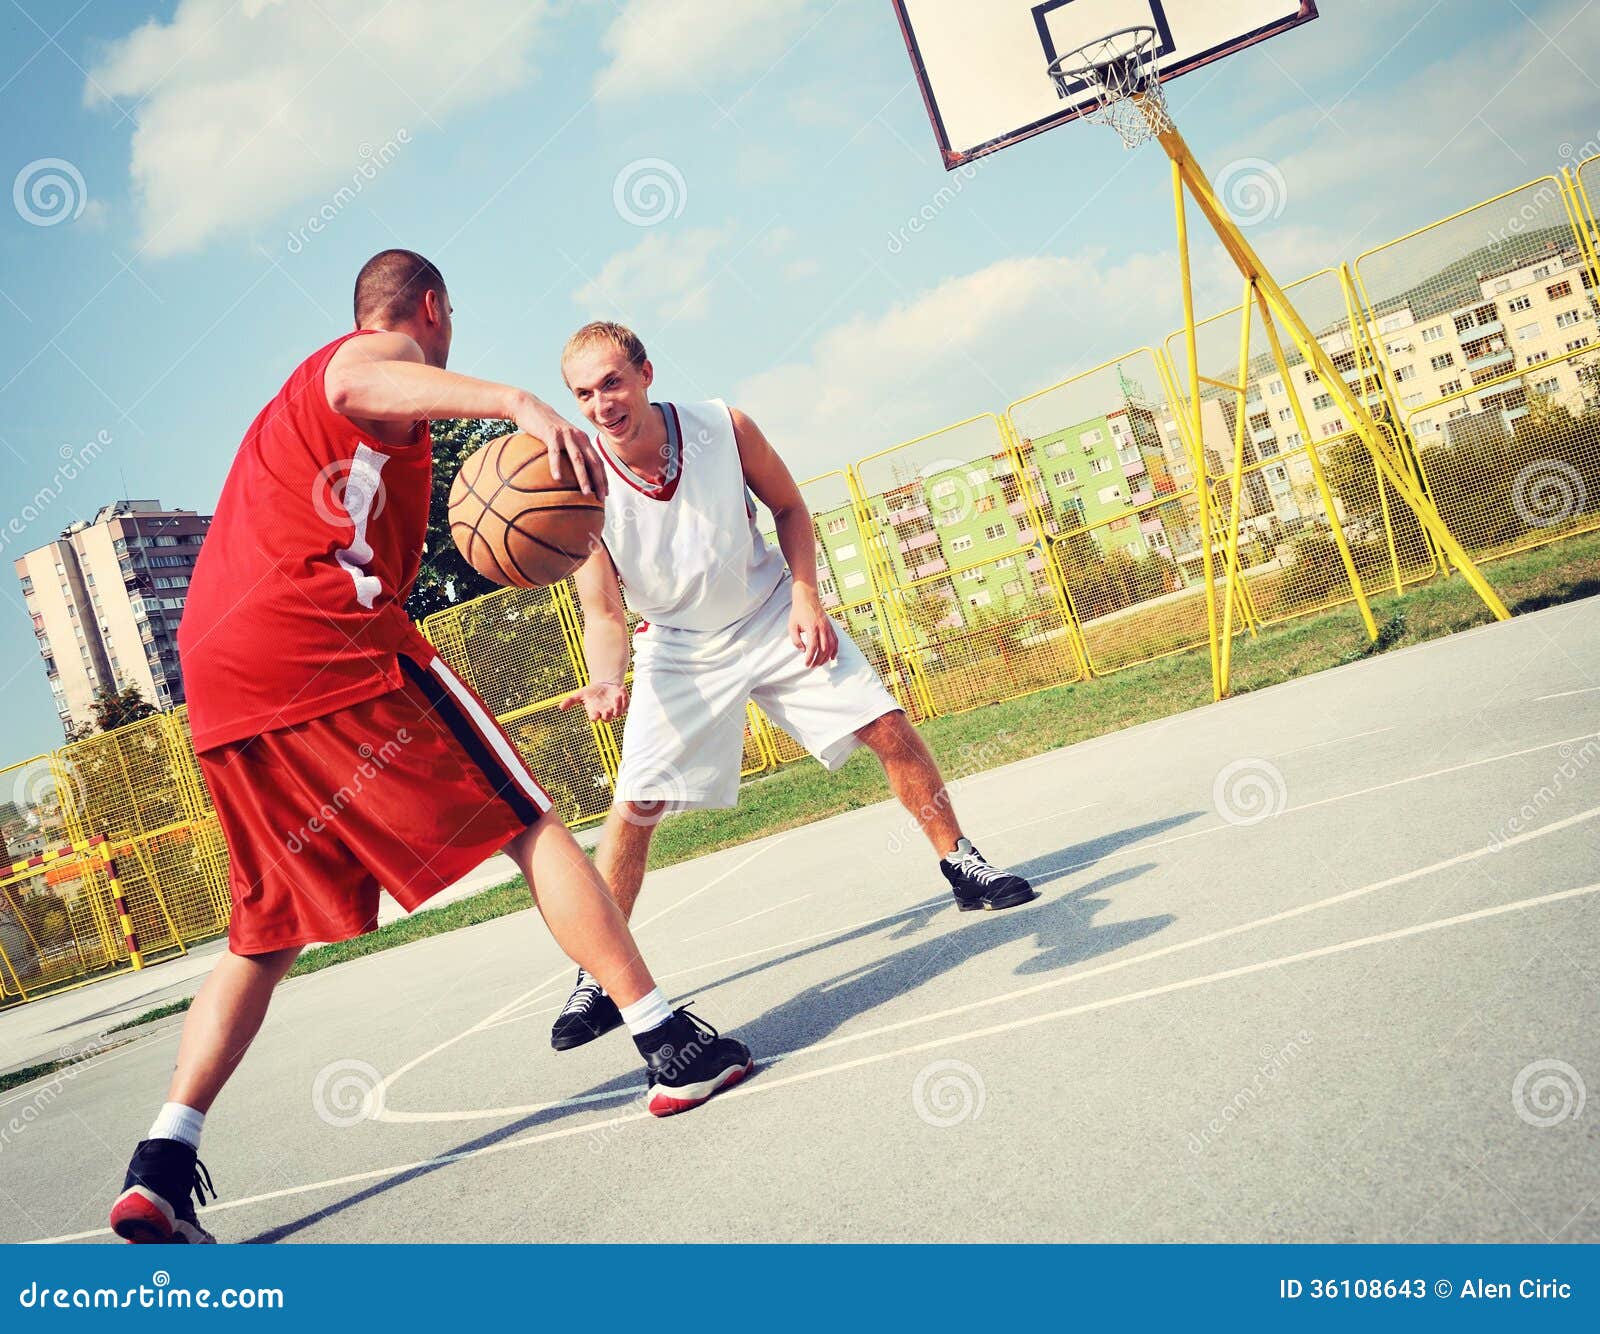 Two Basketball Players On The Court Stock Image - Image of health